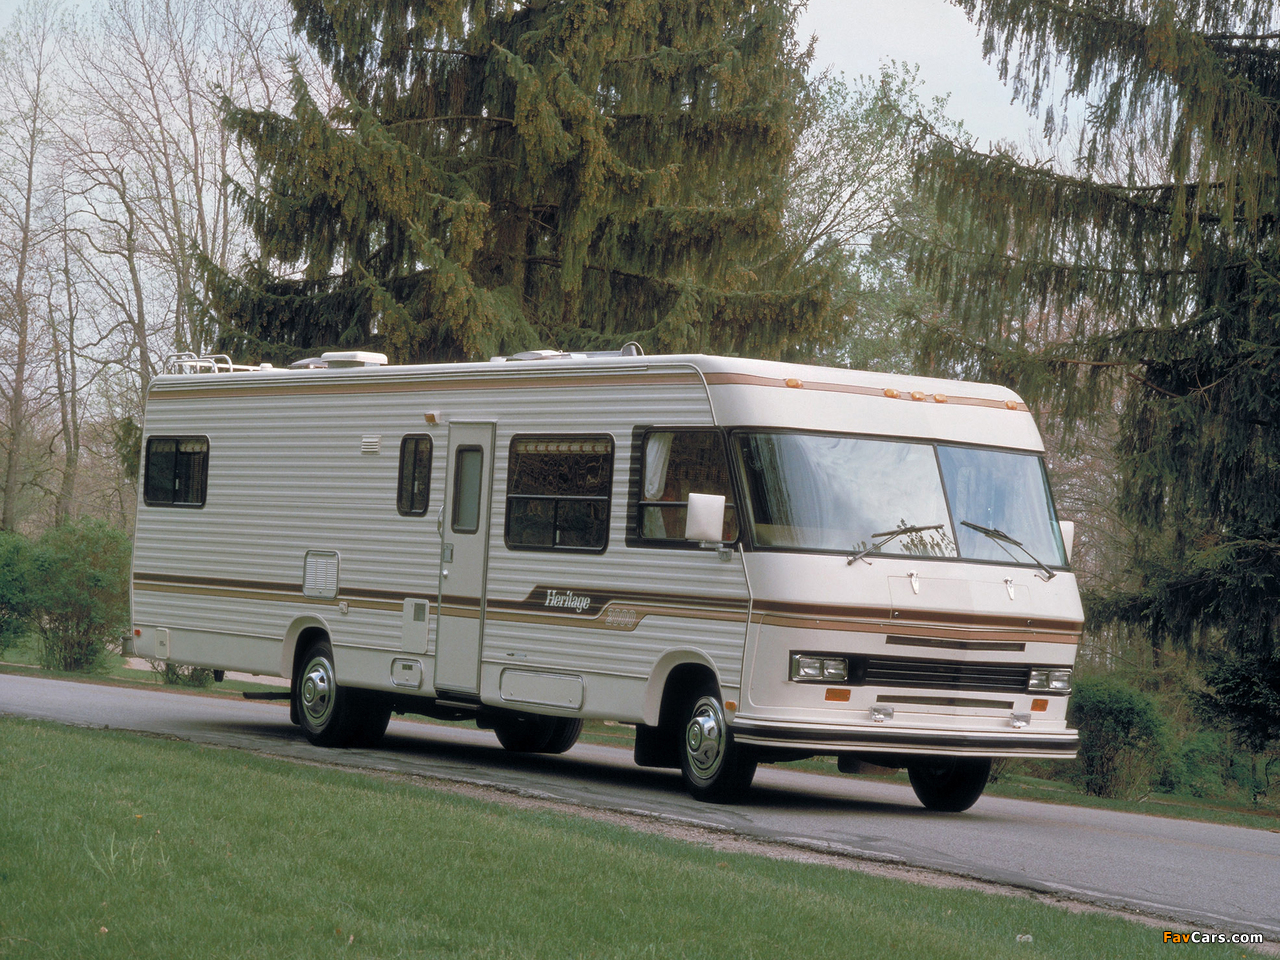 Images of Chevrolet Heritage 2000 Motorhome 1985 (1280 x 960)